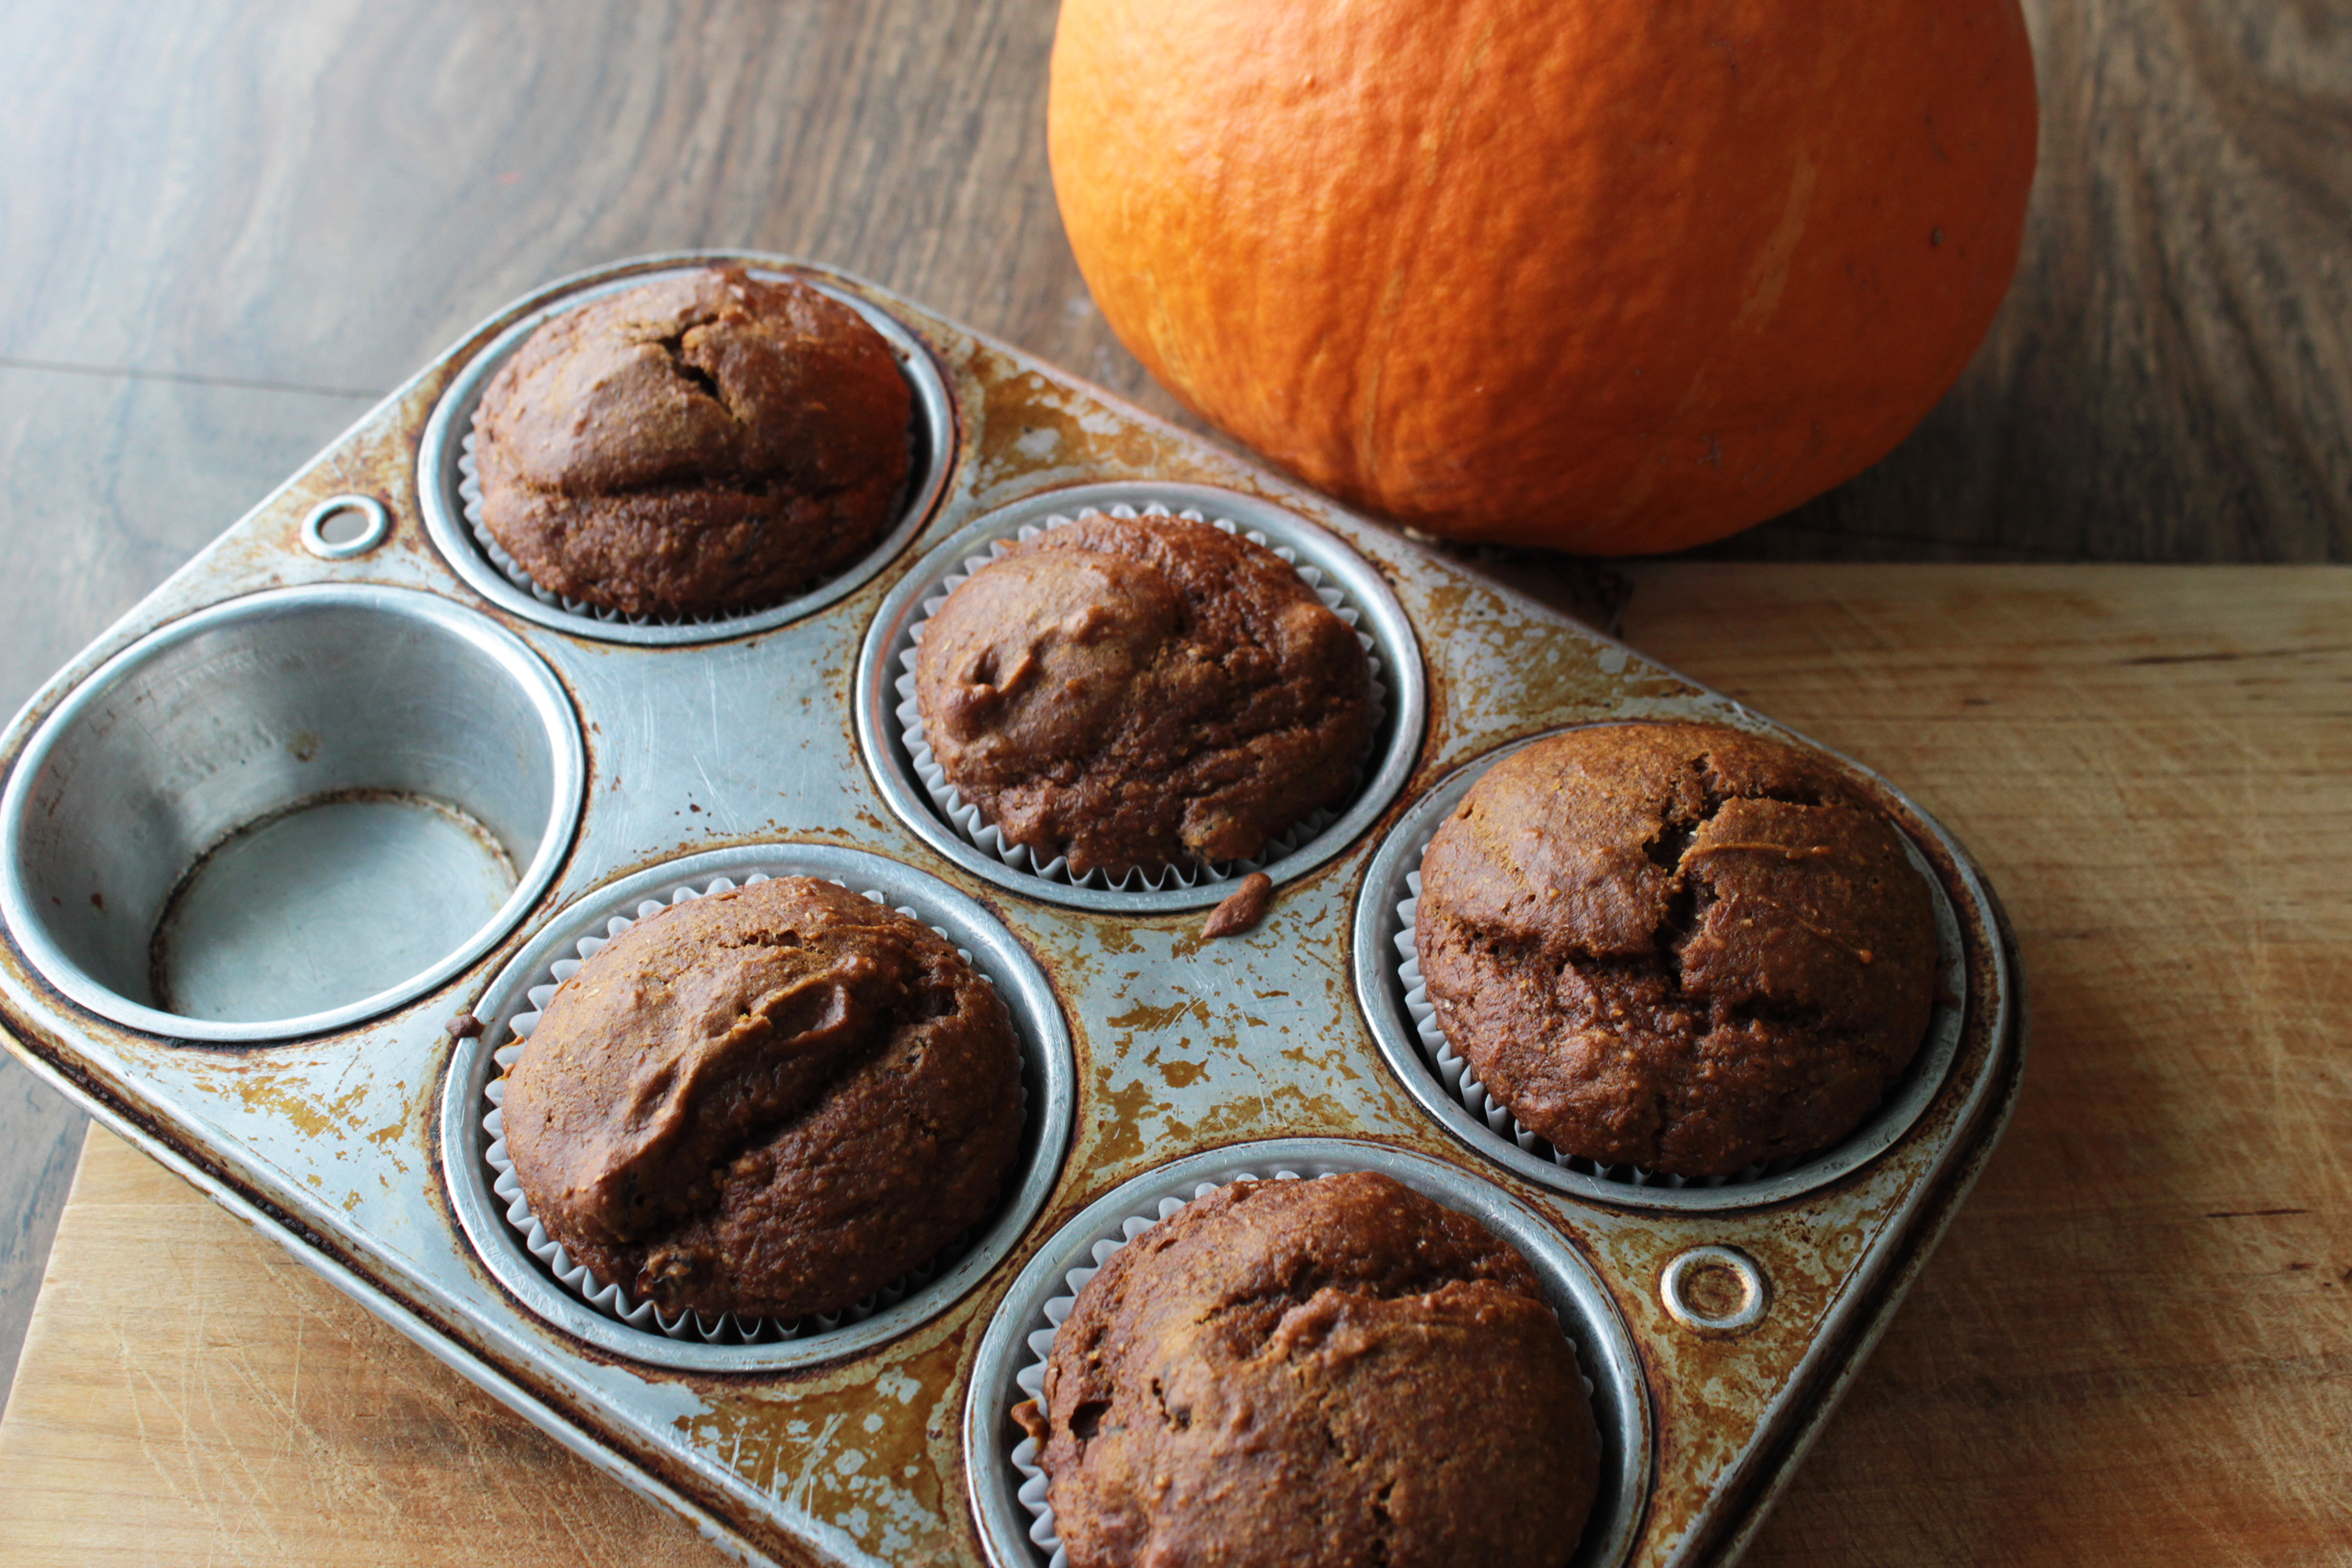 A photo of Red Kuri winter squash muffins, to illustrate our recipe